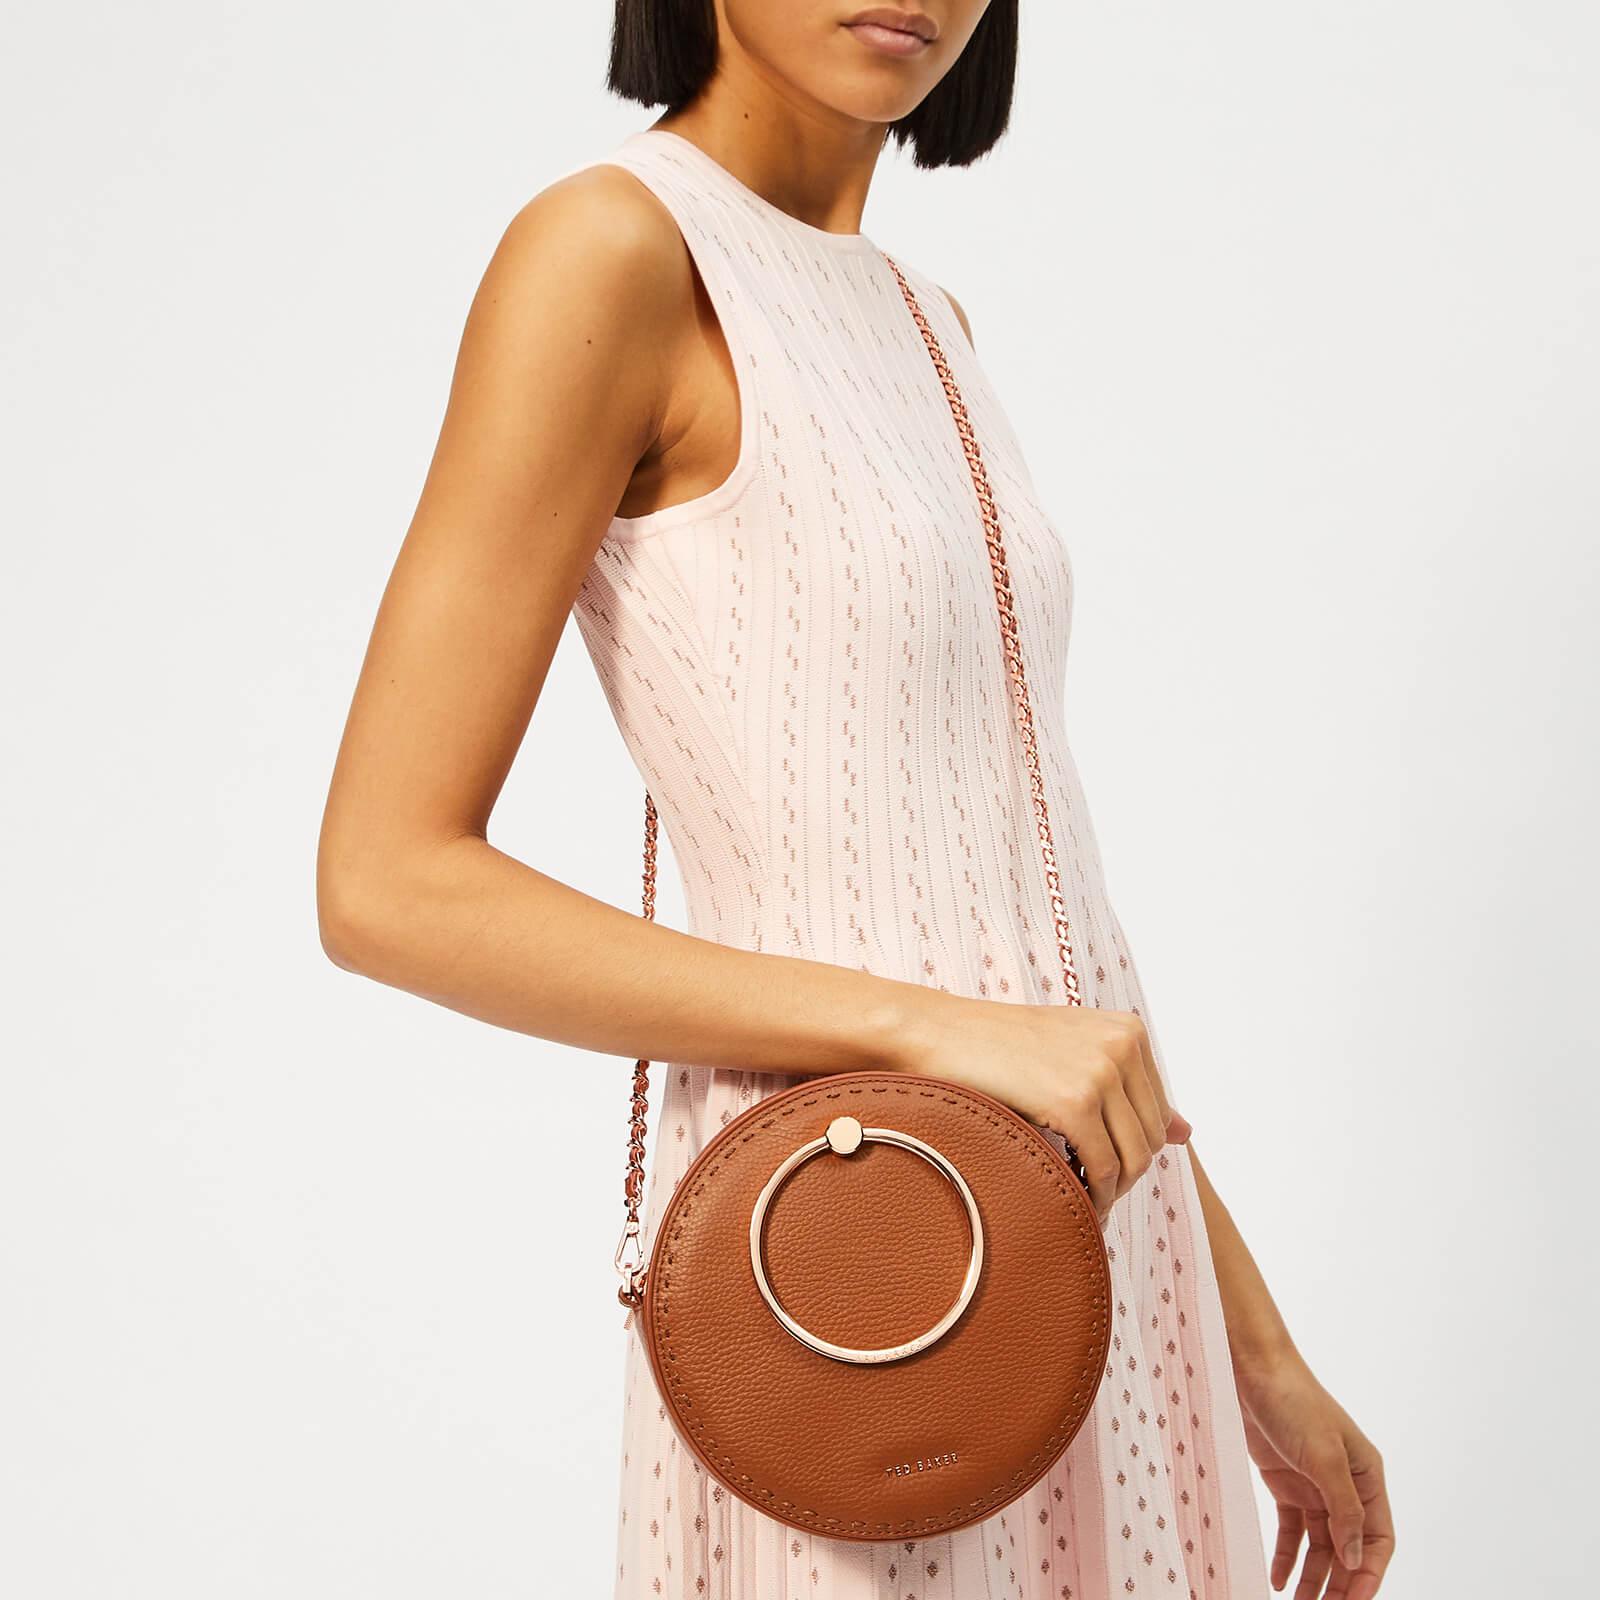 Ted Baker Maddie Circle Leather Crossbody Bag in Brown - Lyst